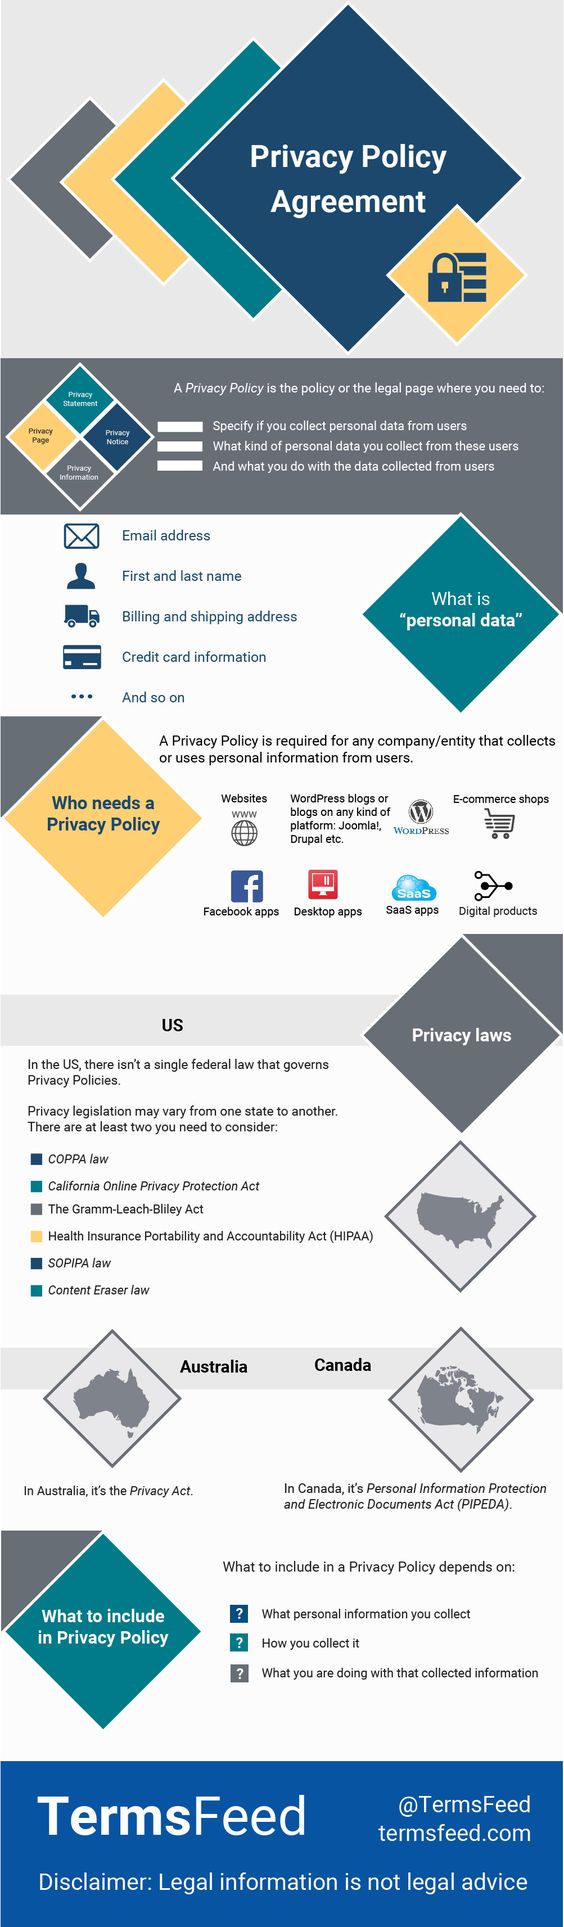 The Privacy Policy Agreement and Template basics